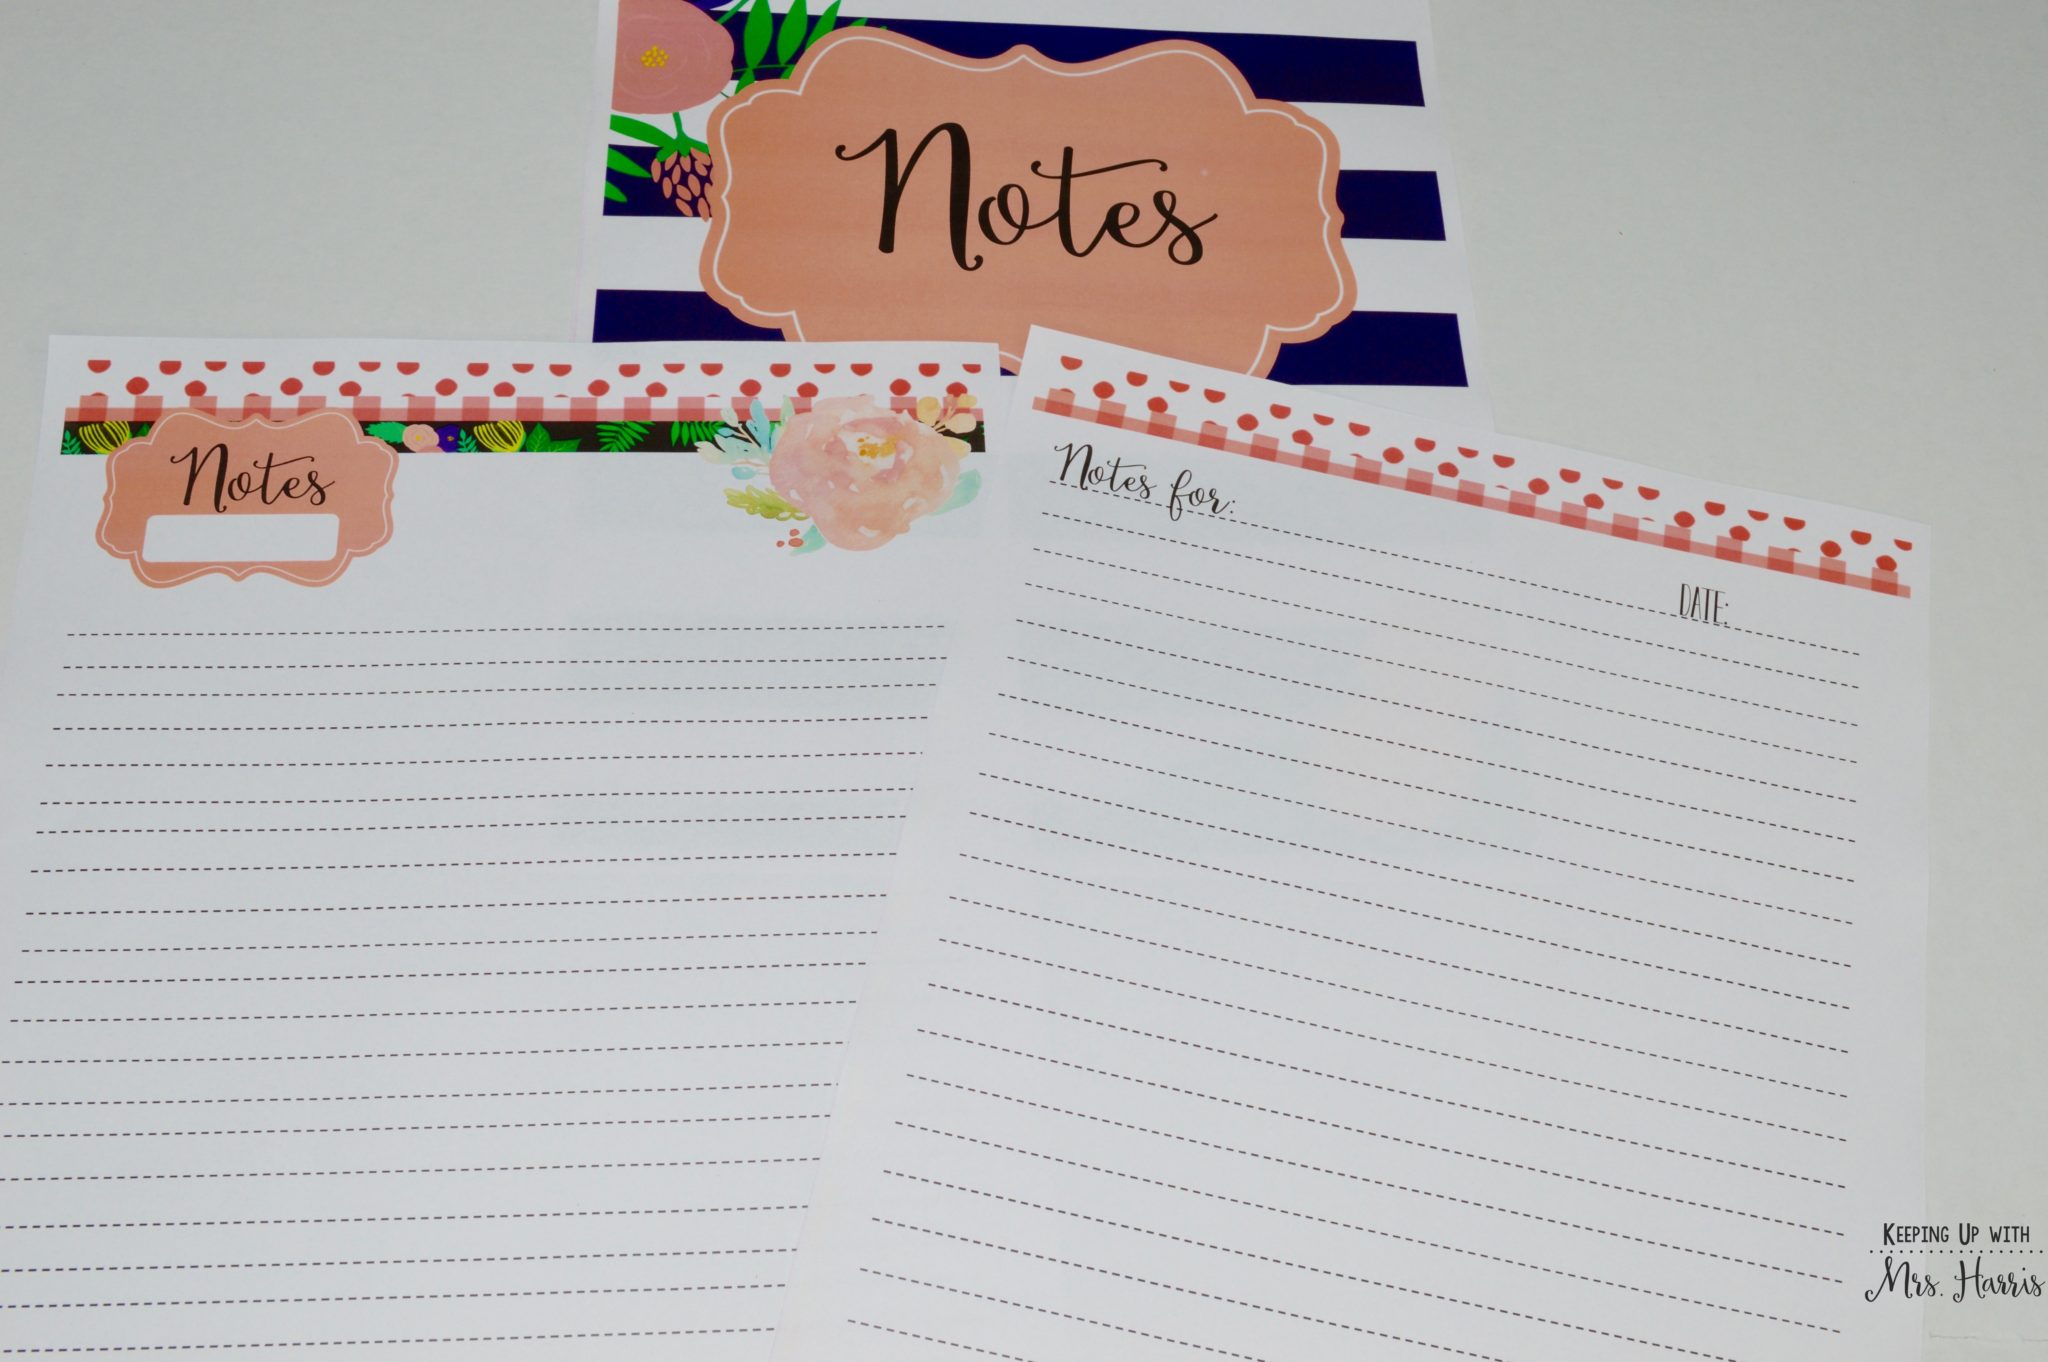 Teacher Planner - Let's get you organized for the new year!